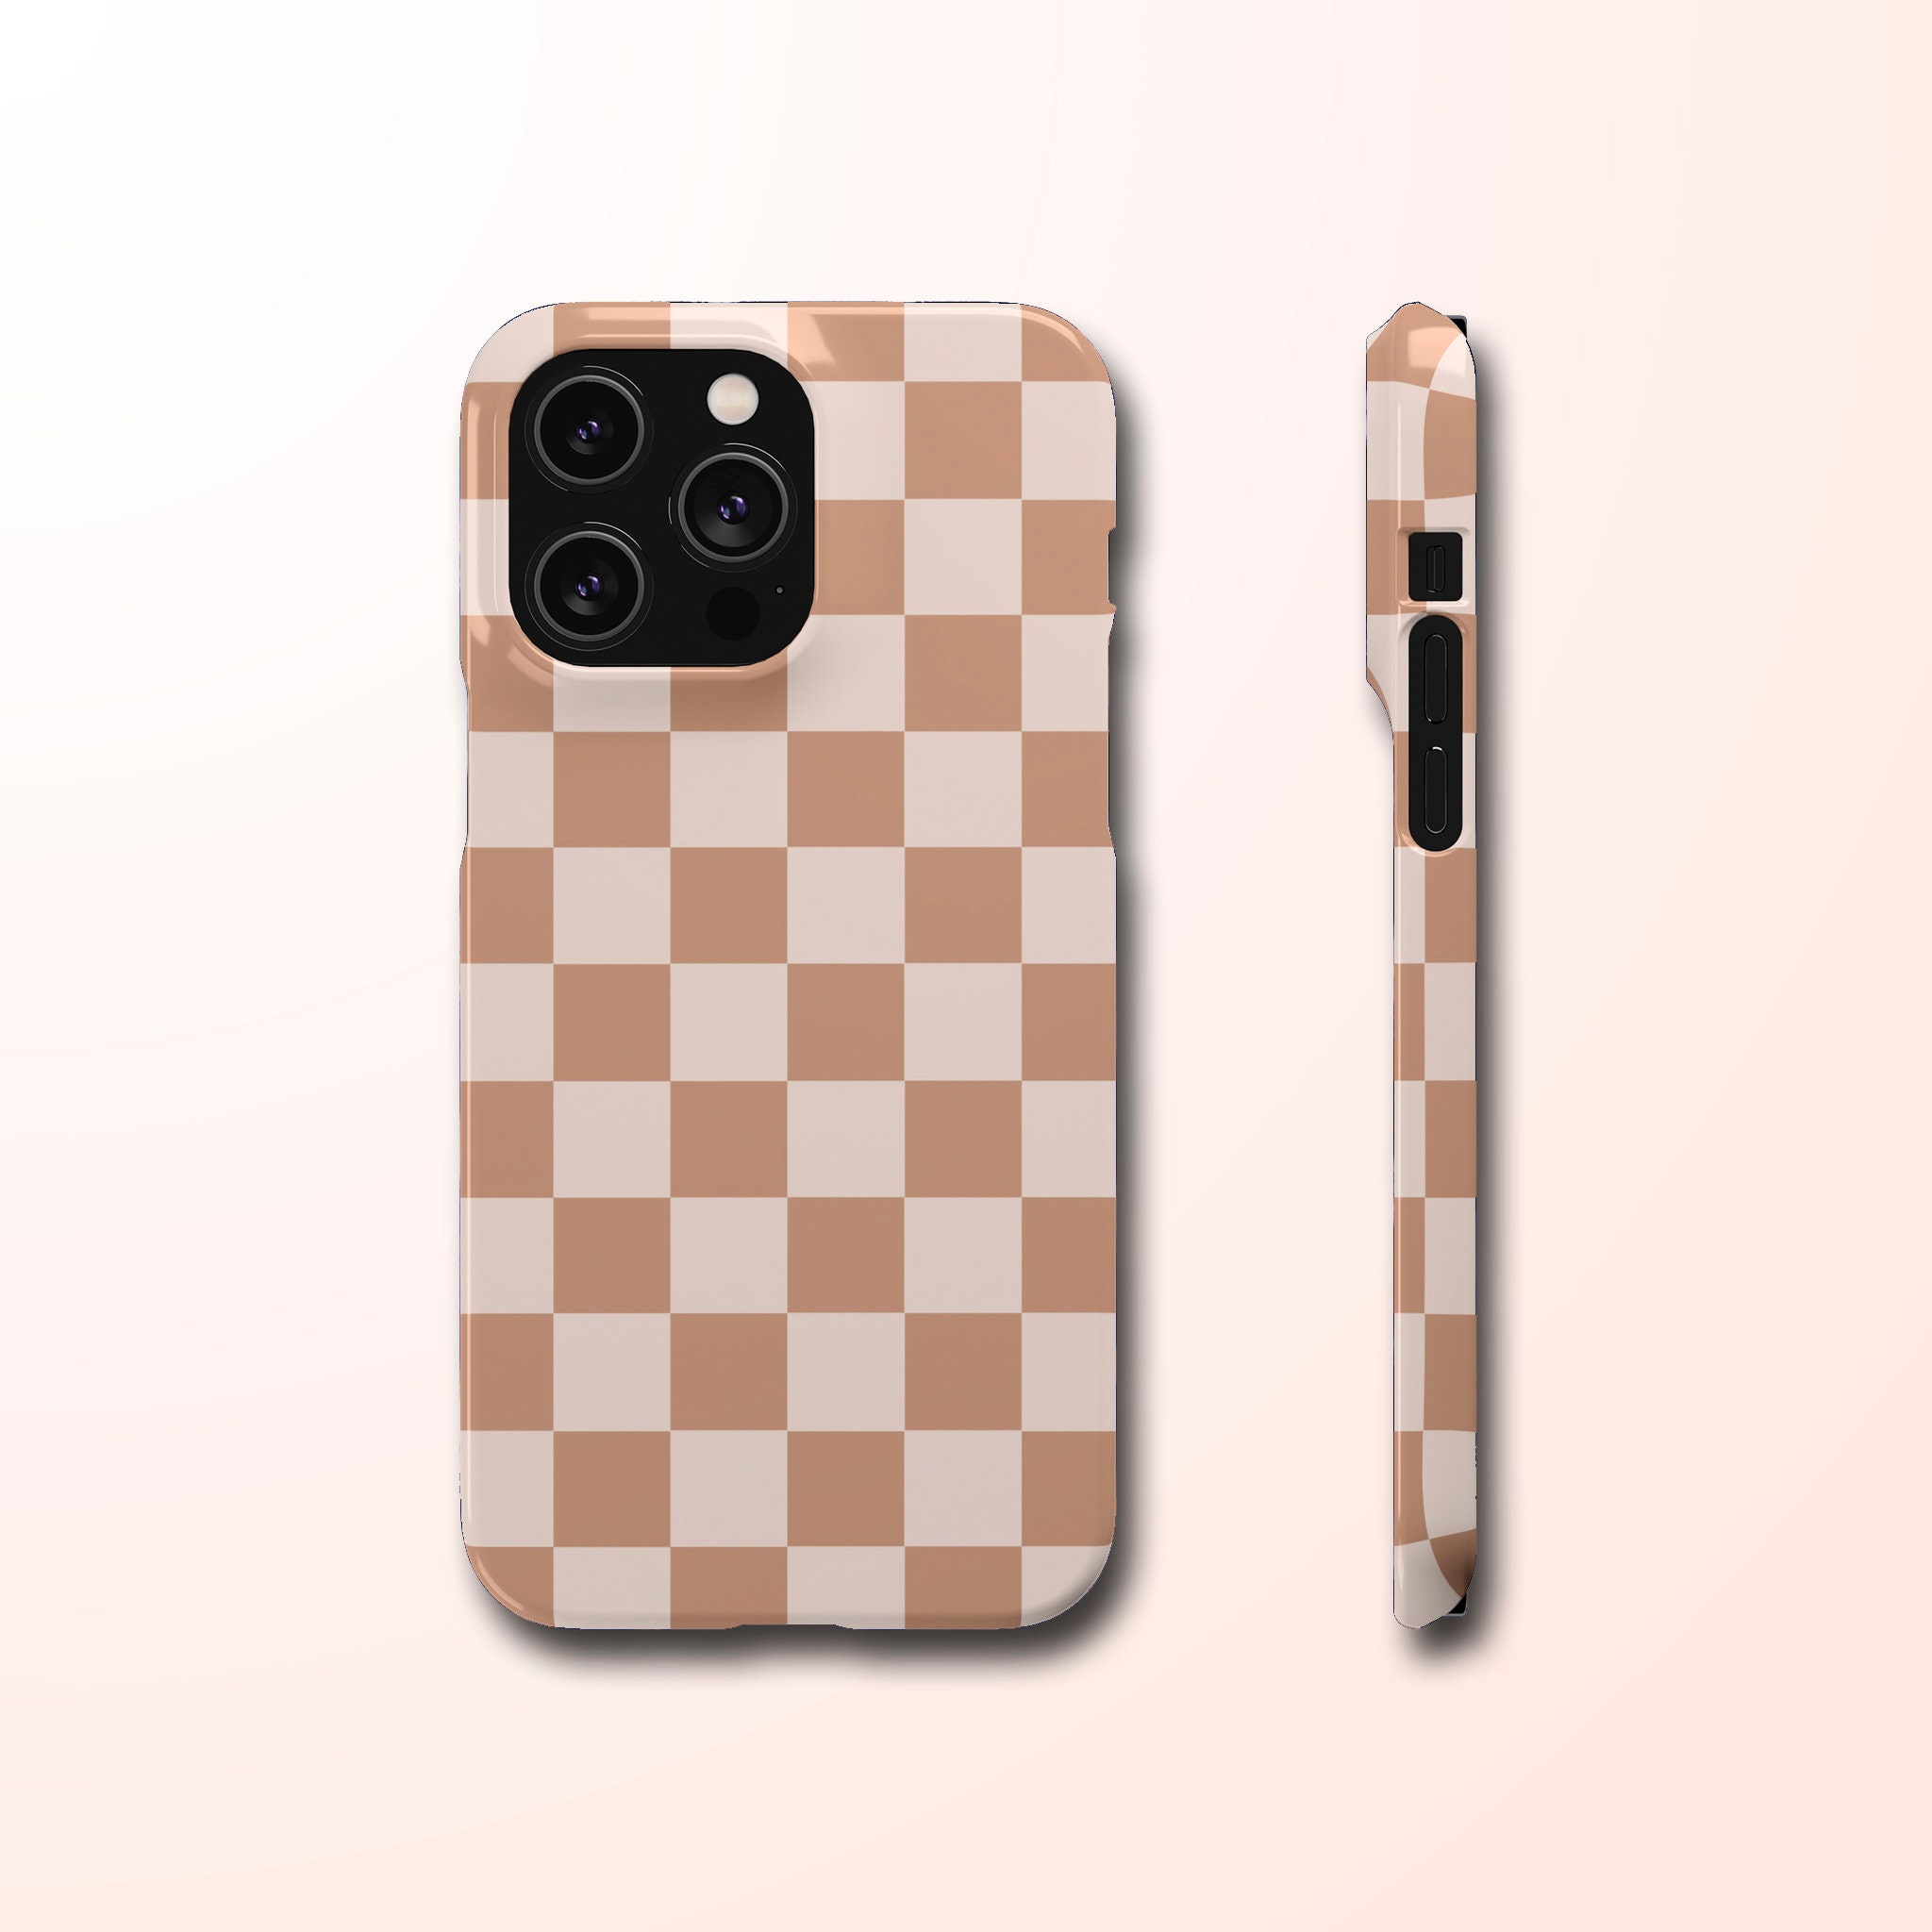 Buy Checkered Phone Case Online In India -  India